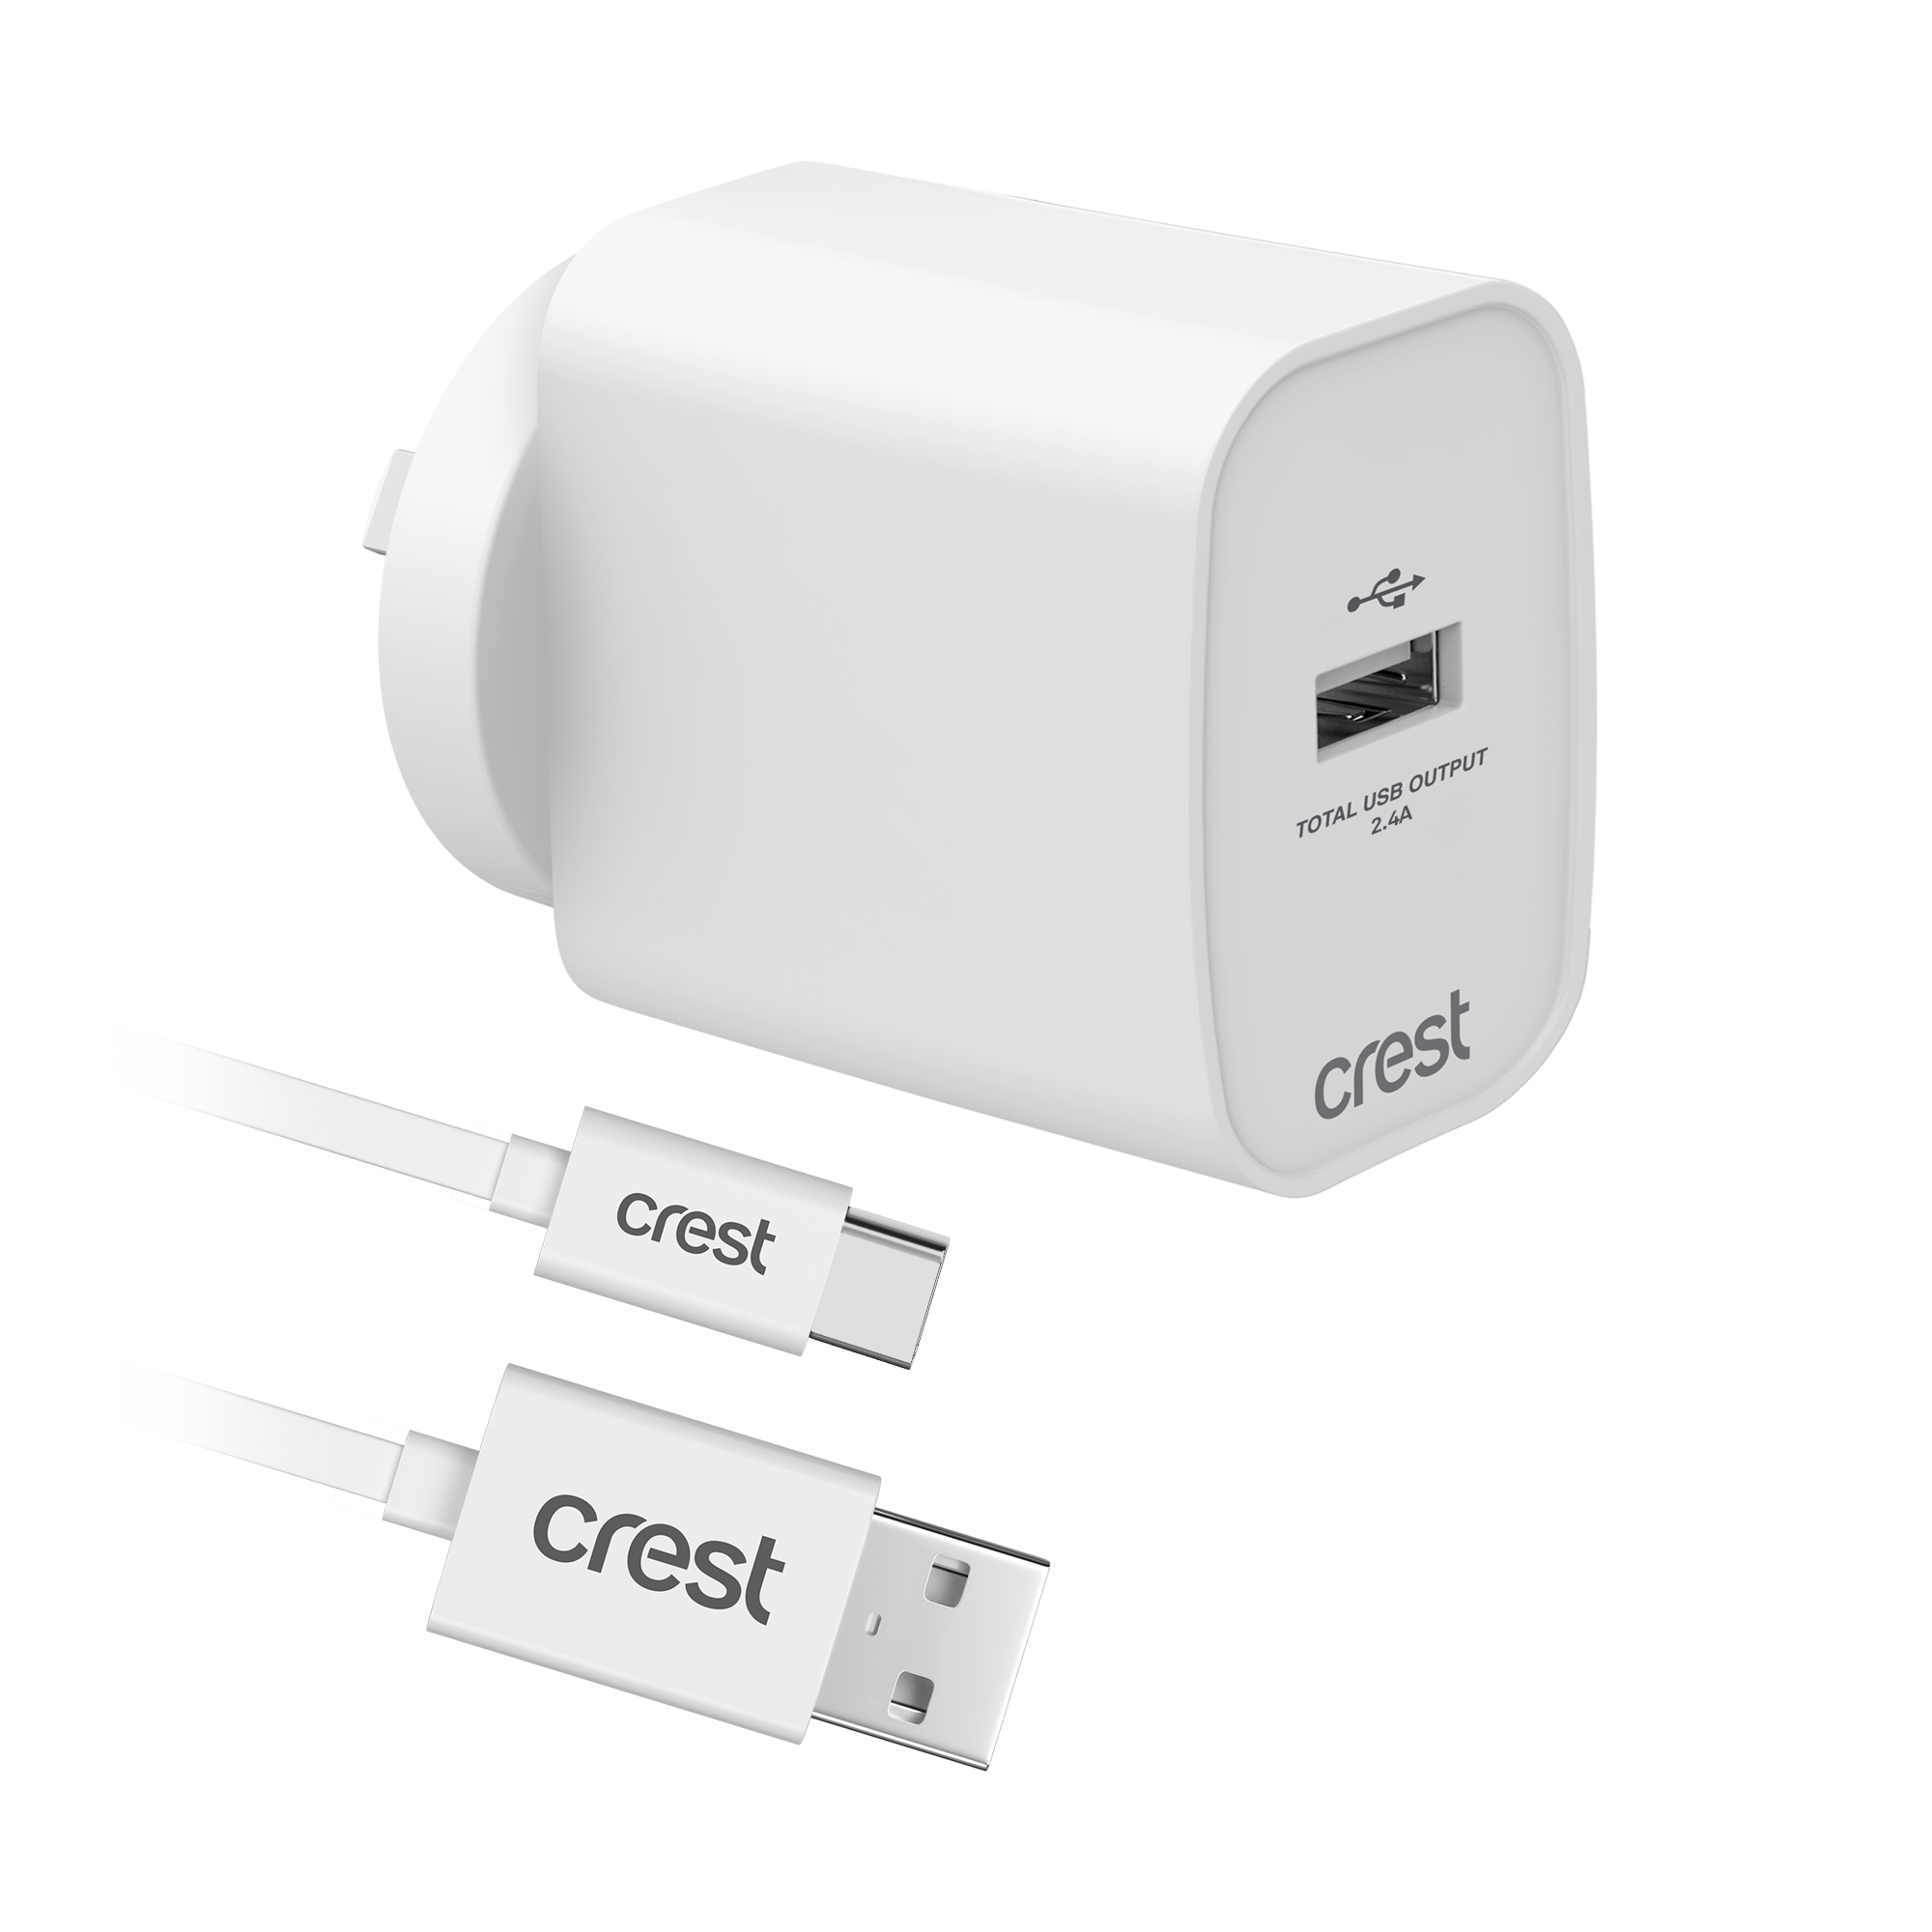 USB-C Wall Charger & USB-C Cable